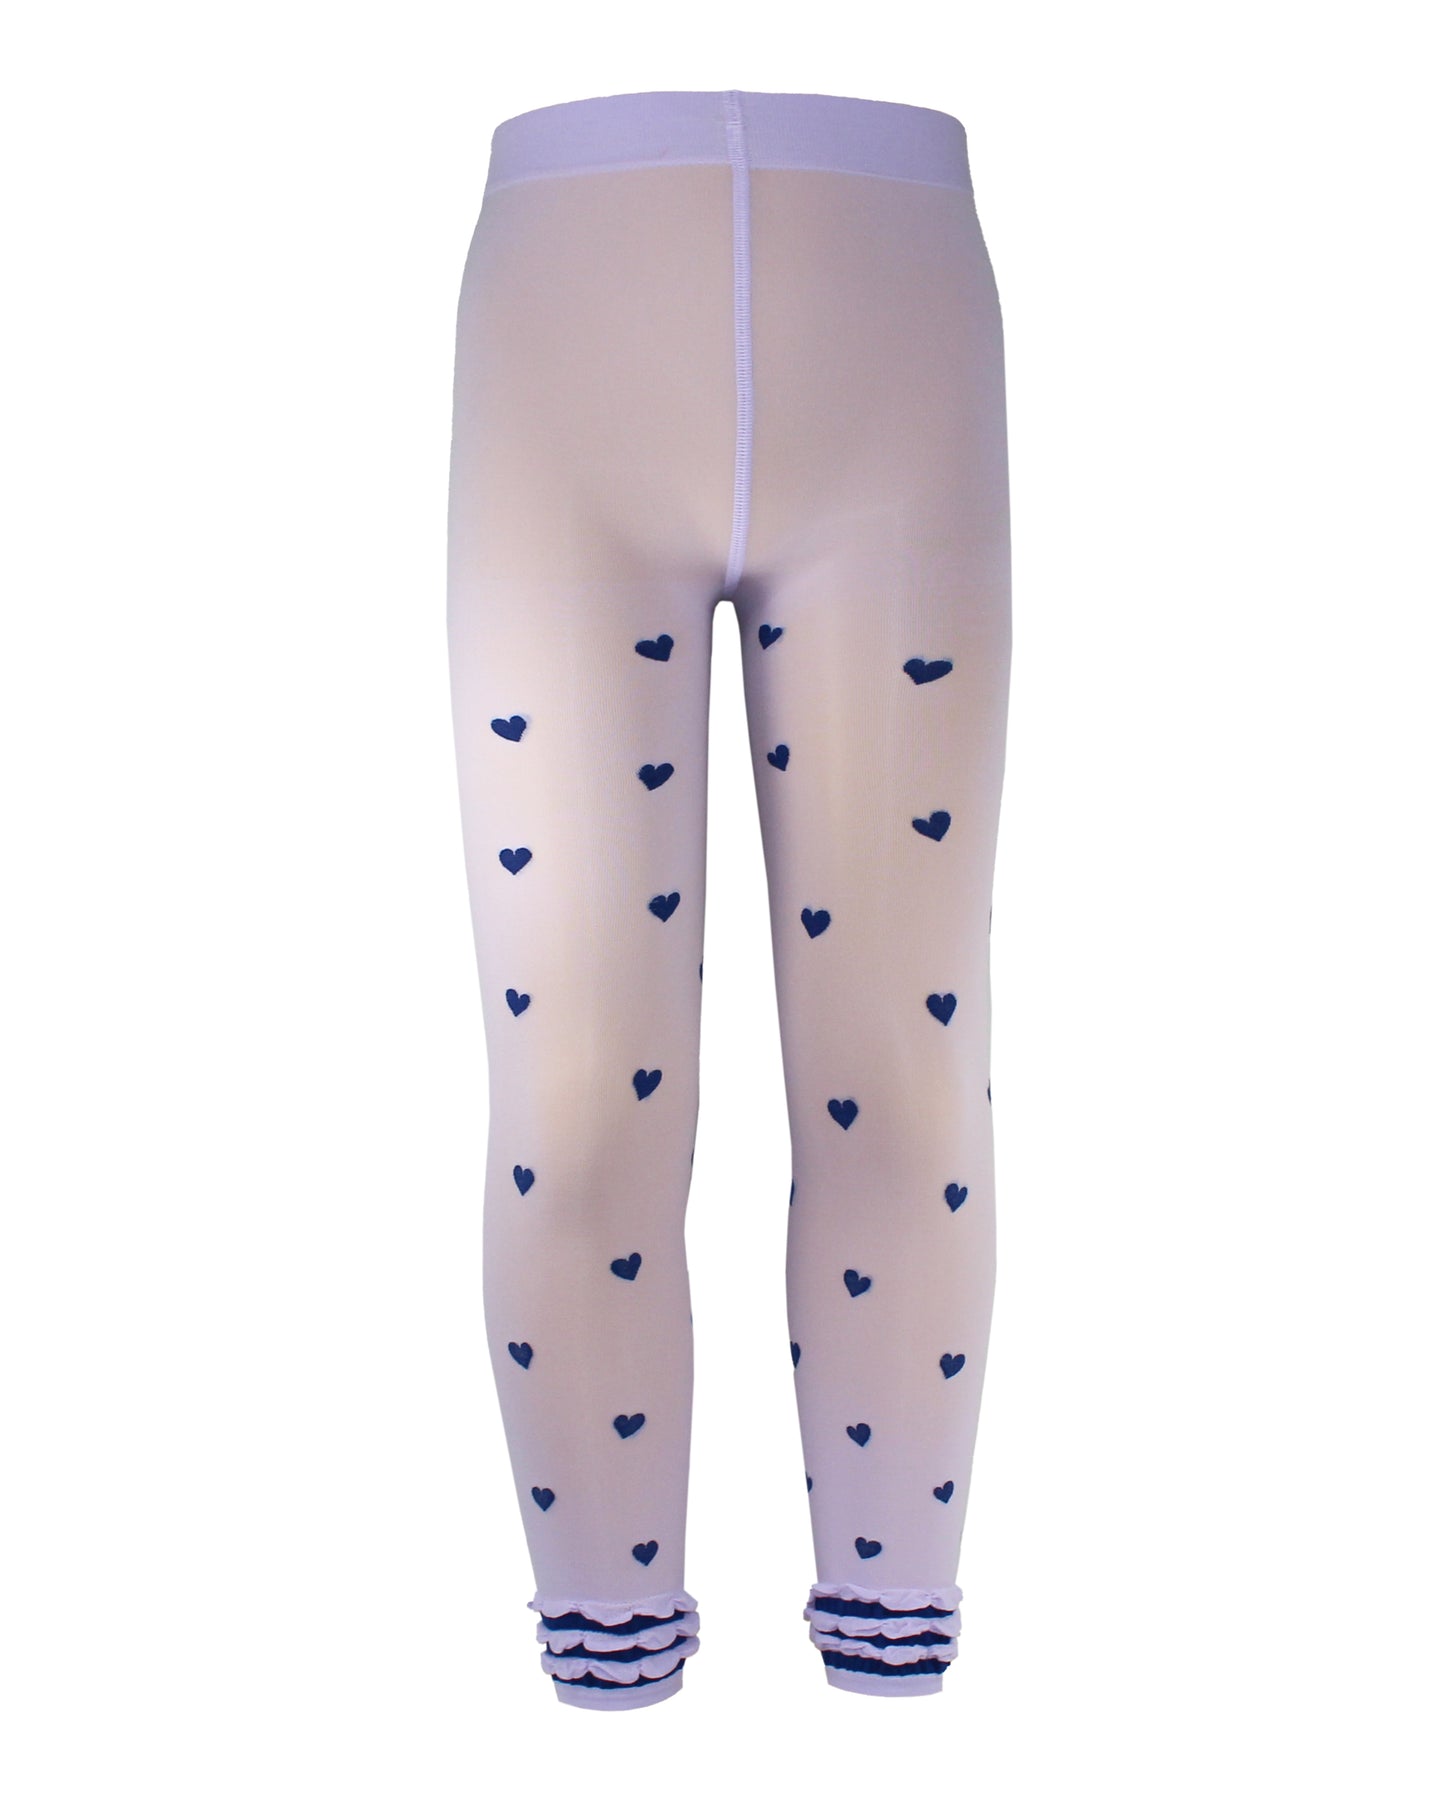 Omsa Fancy Leggings - Soft semi-opaque lilac purple kid's footless tights with an all over woven heart pattern in navy with a ruched striped cuff.